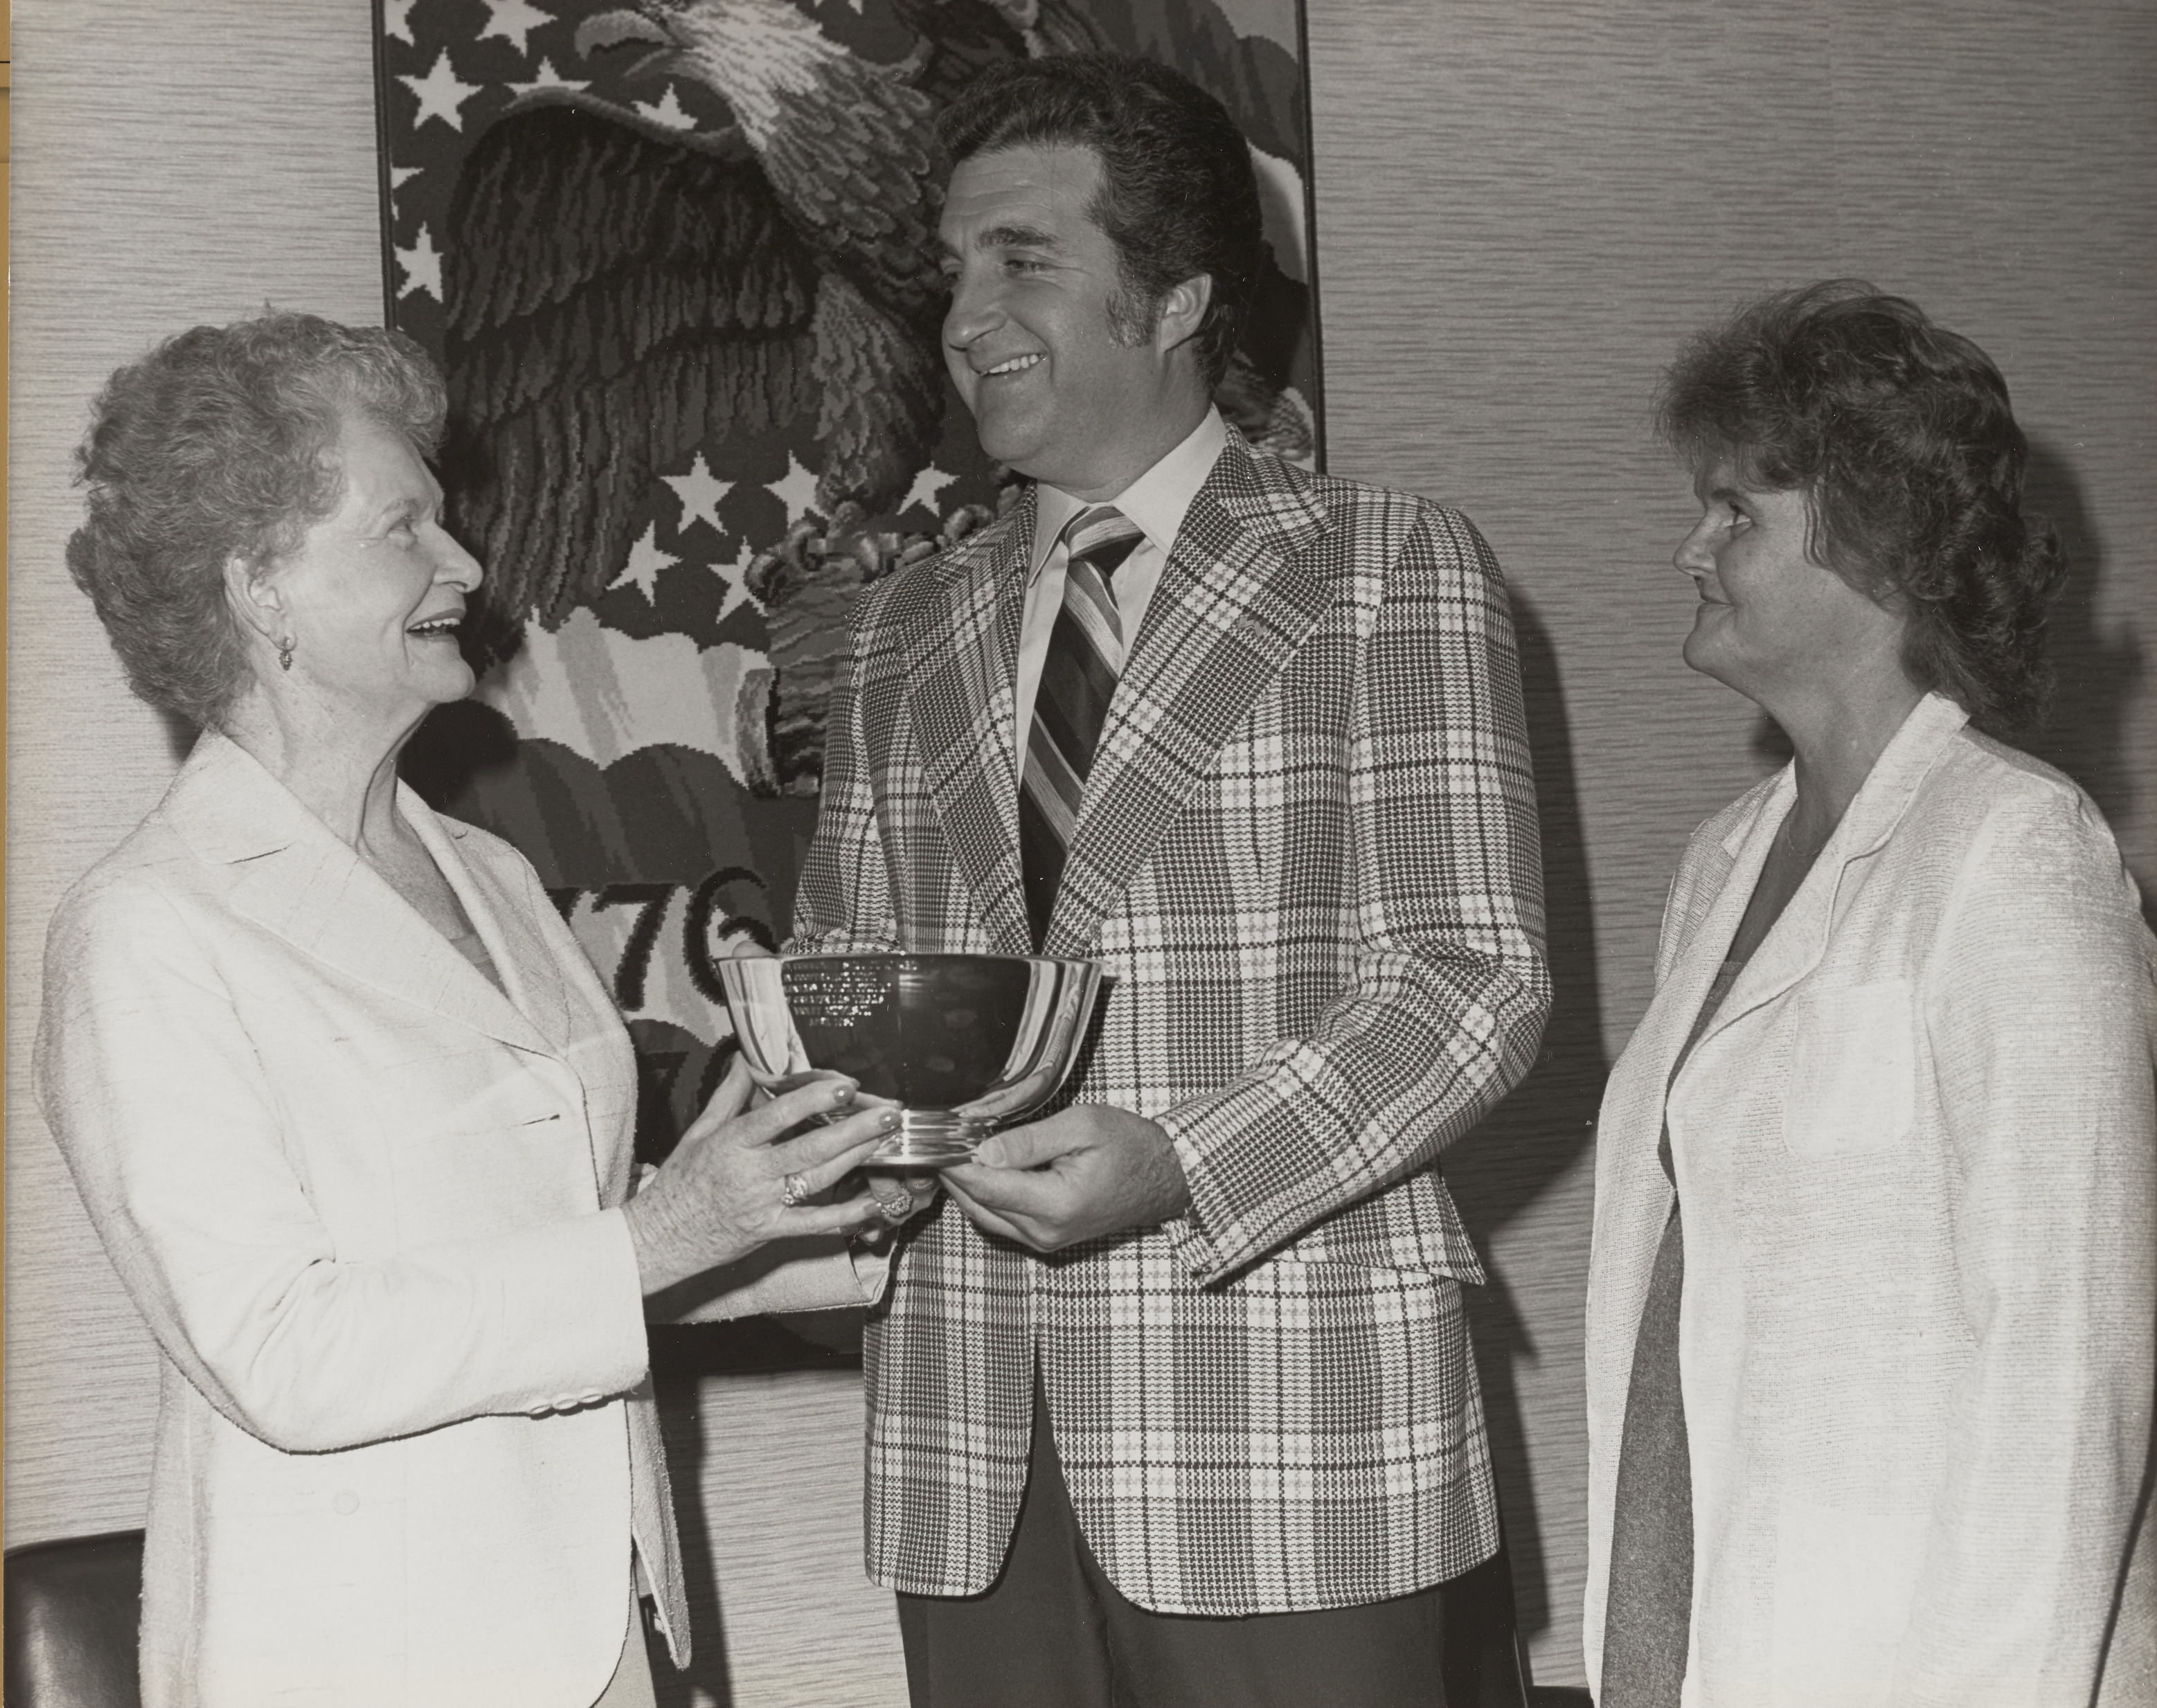 Photograph of Ron Lurie giving commemorative bowl to unidentified woman